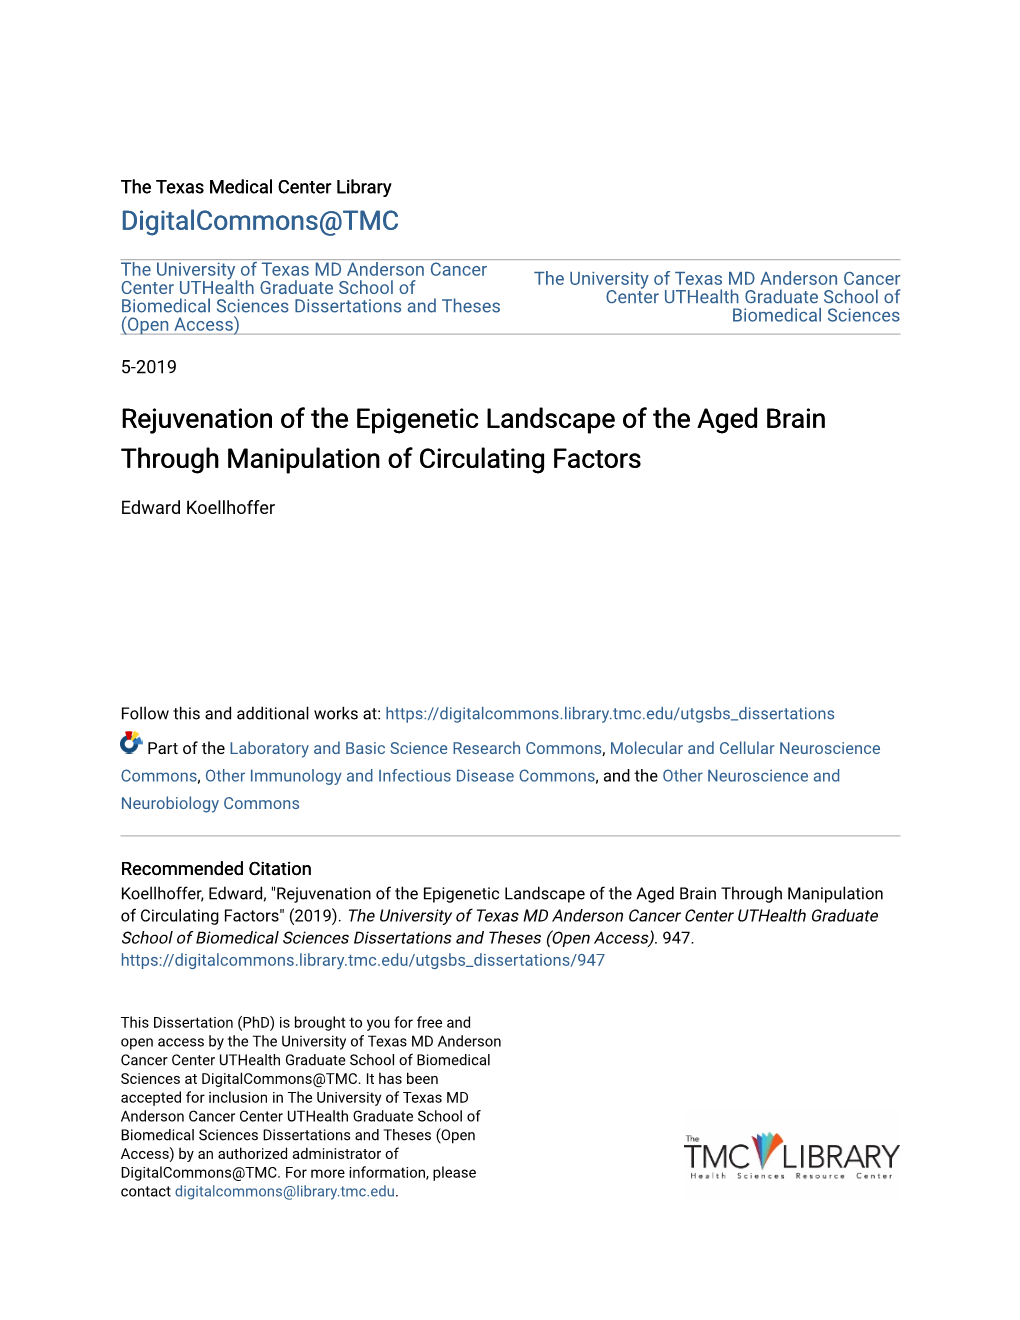 Rejuvenation of the Epigenetic Landscape of the Aged Brain Through Manipulation of Circulating Factors